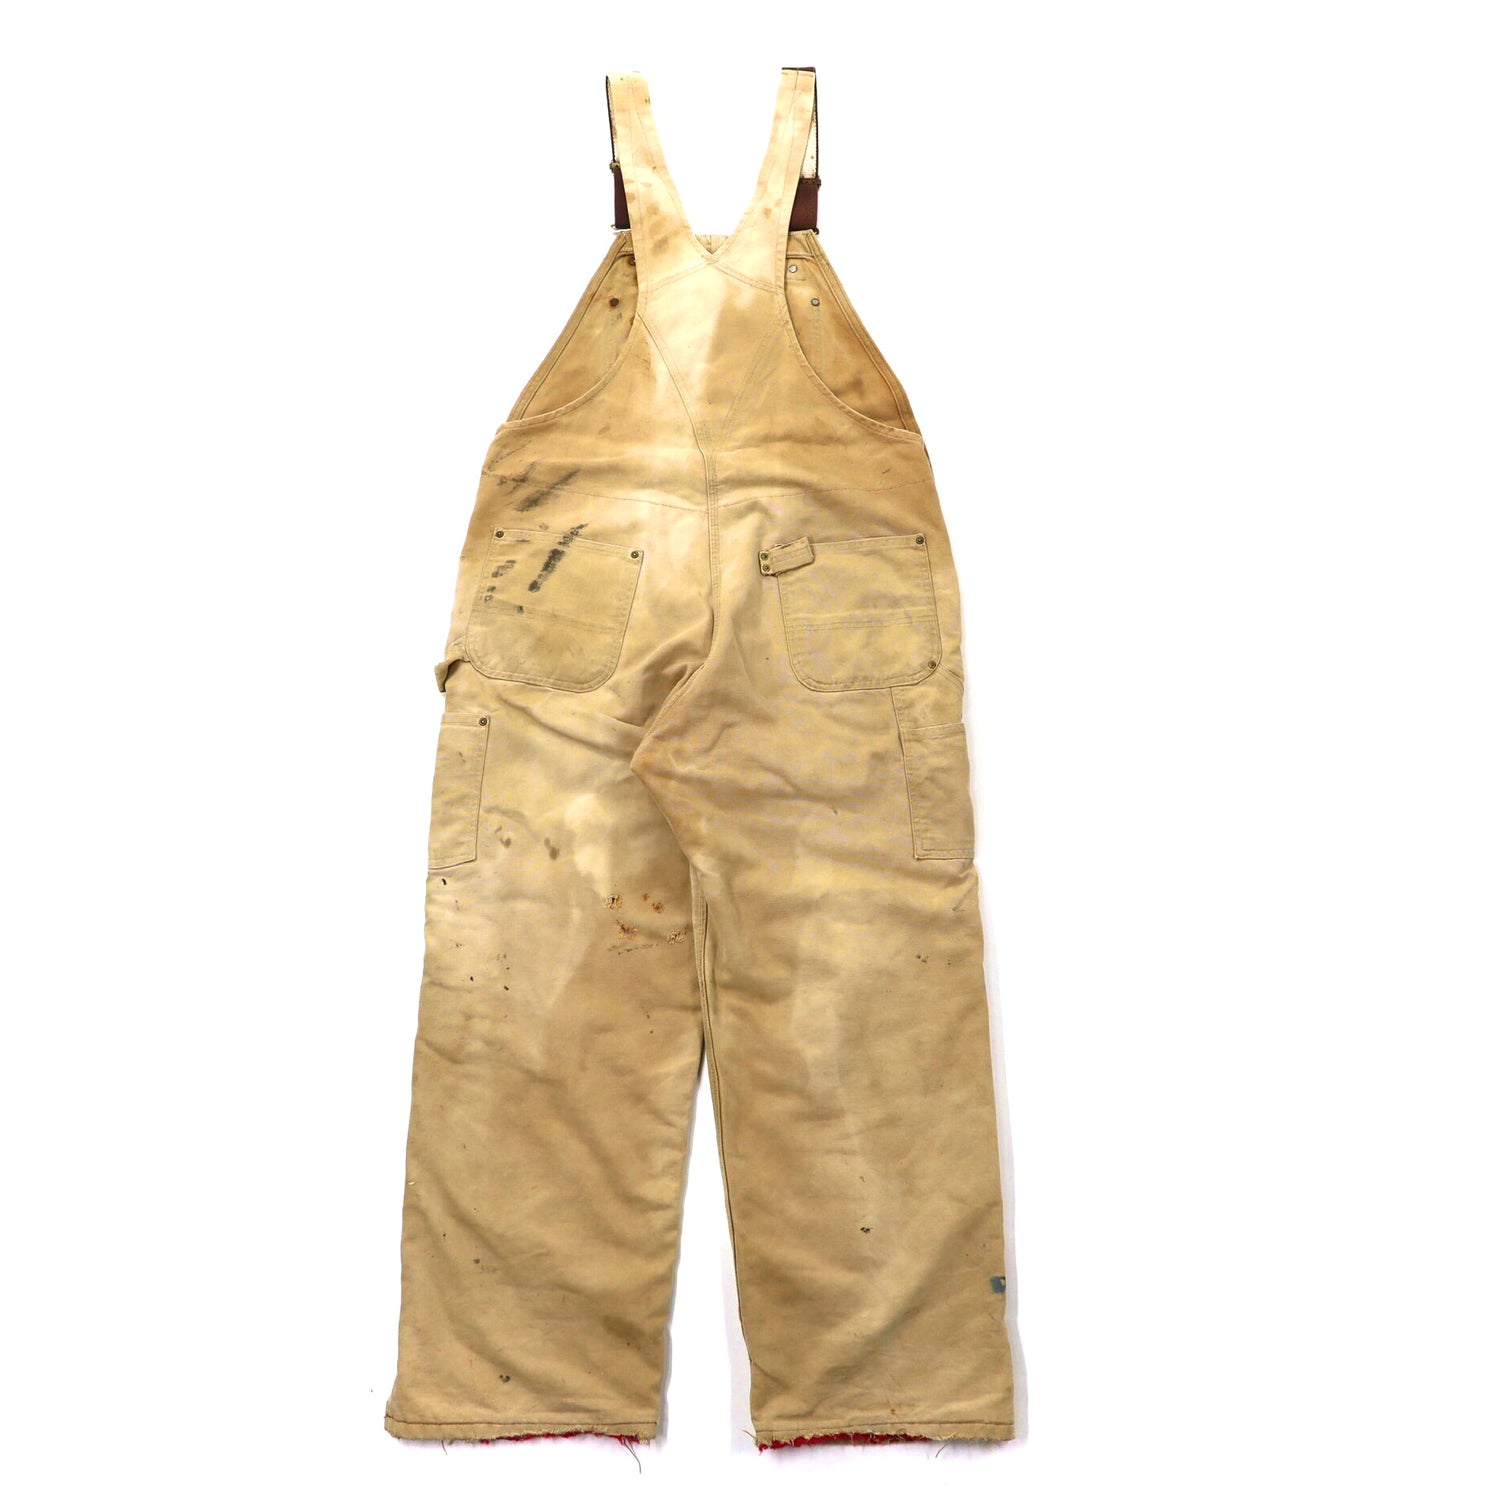 CARHARTT Double knee Overall 40 Beige Duck Star Tag 80s USA